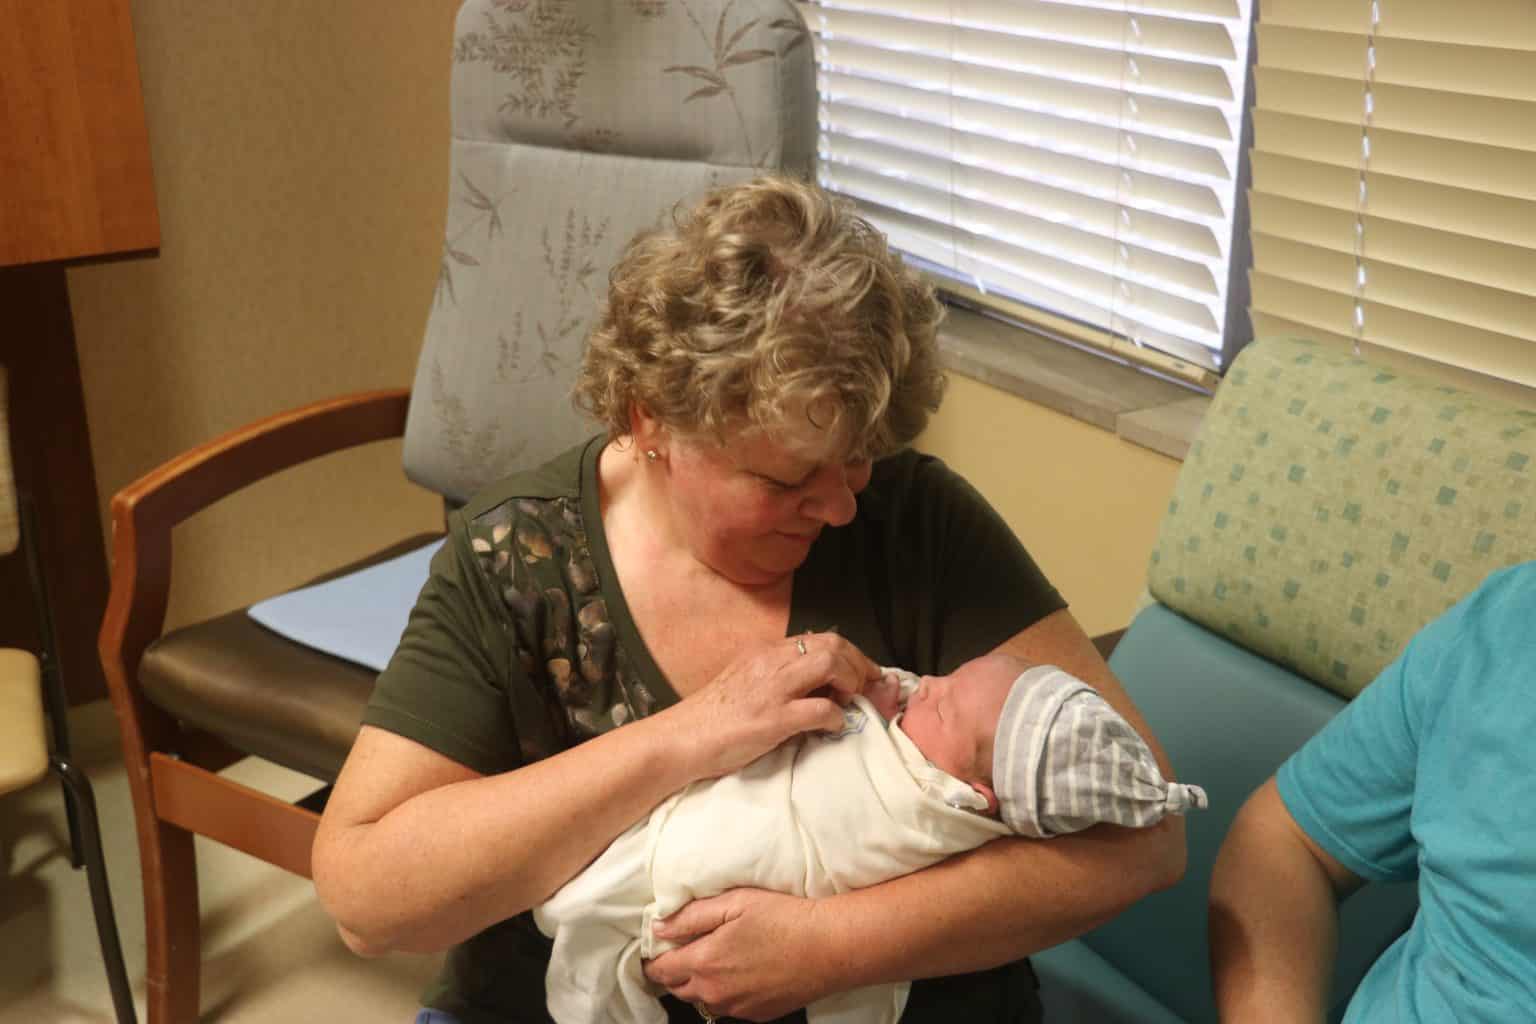 becoming a grandmother for the first time